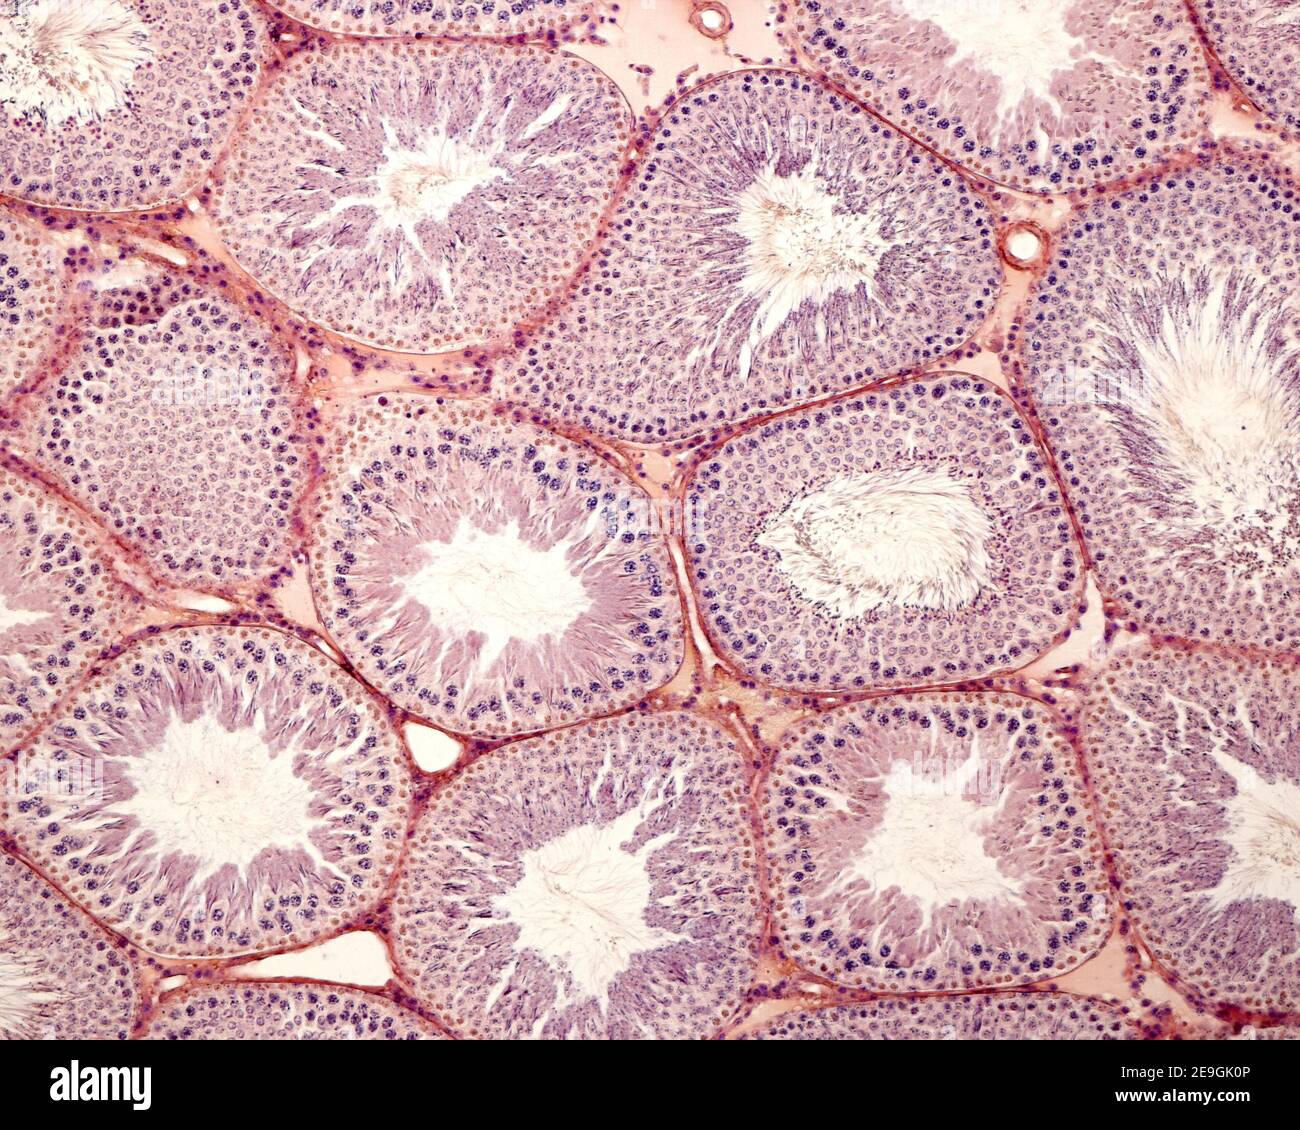 Testicle stained with the Mallory’s phosphotungstic hematoxylin. This method highlights the meiotic primary spermatocytes of the germinal epithelium. Stock Photo